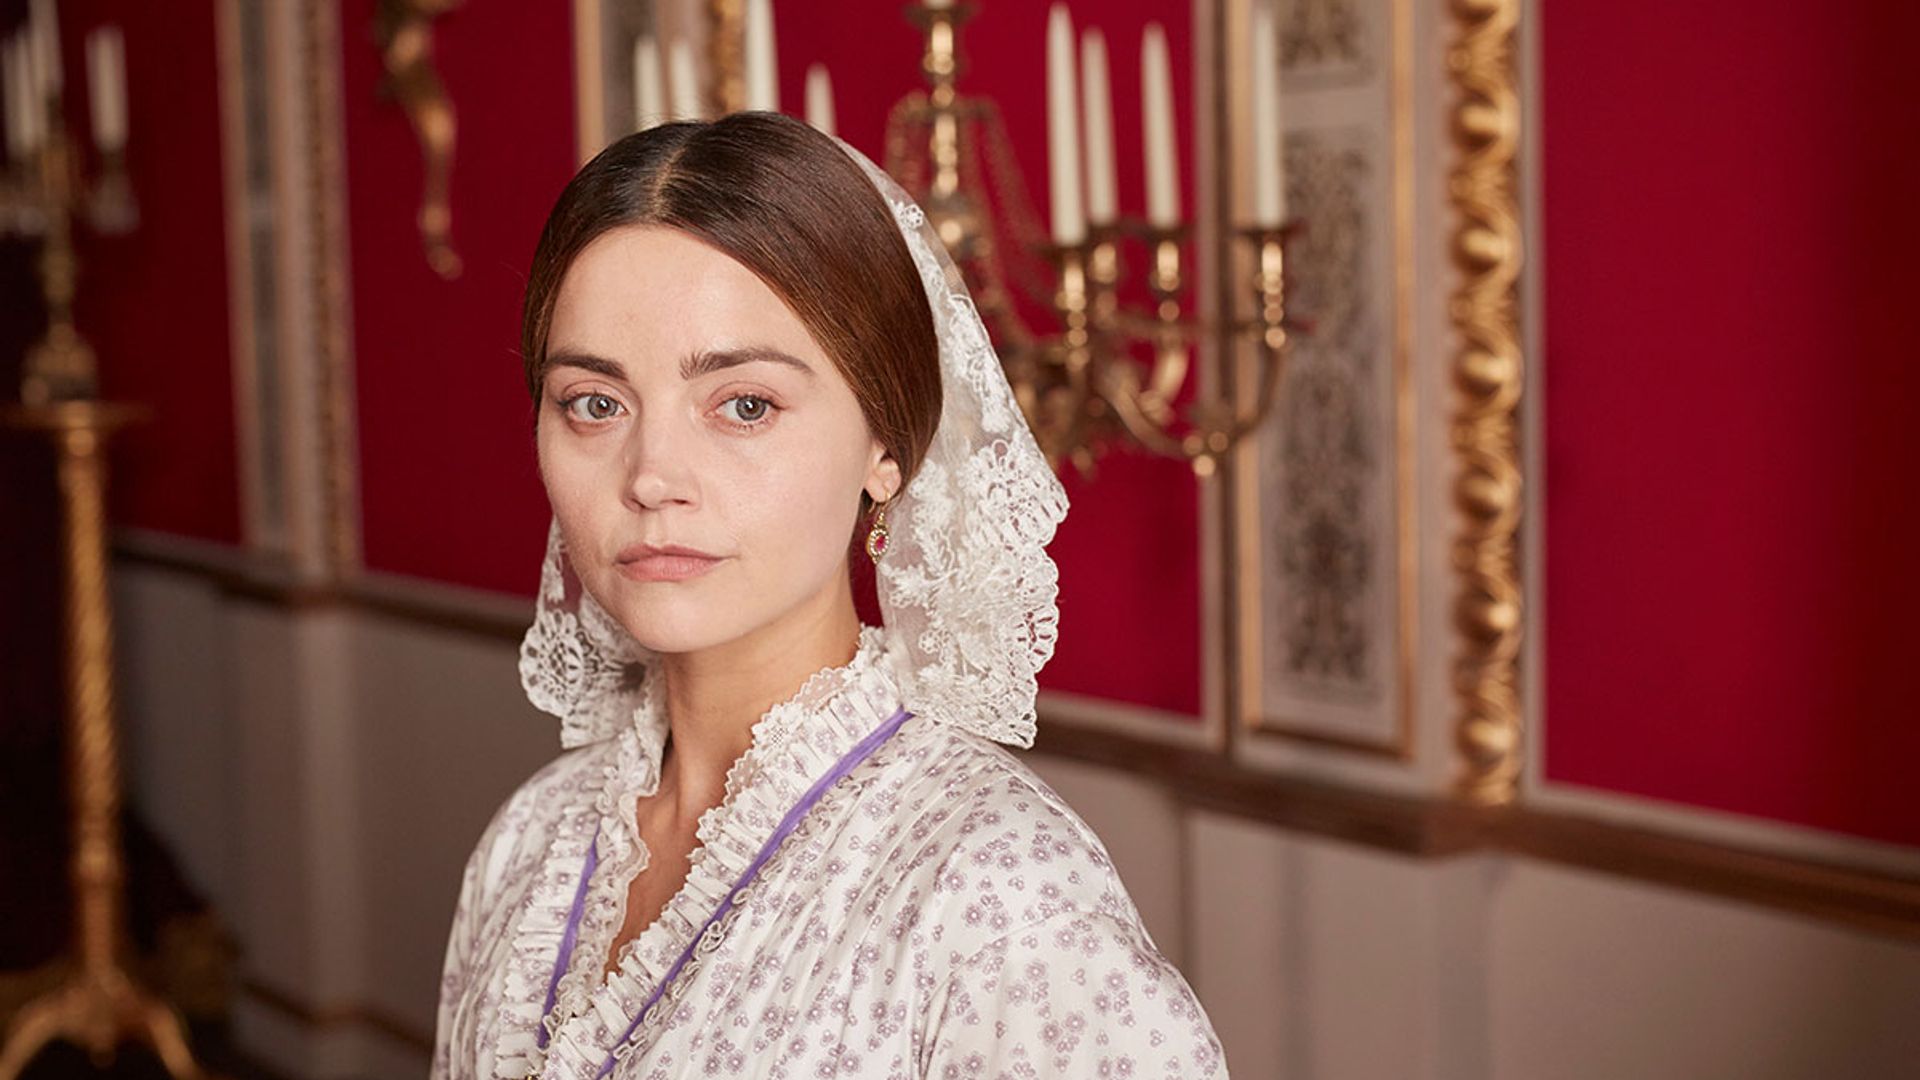 ITV bosses share disappointing update on future of period drama Victoria